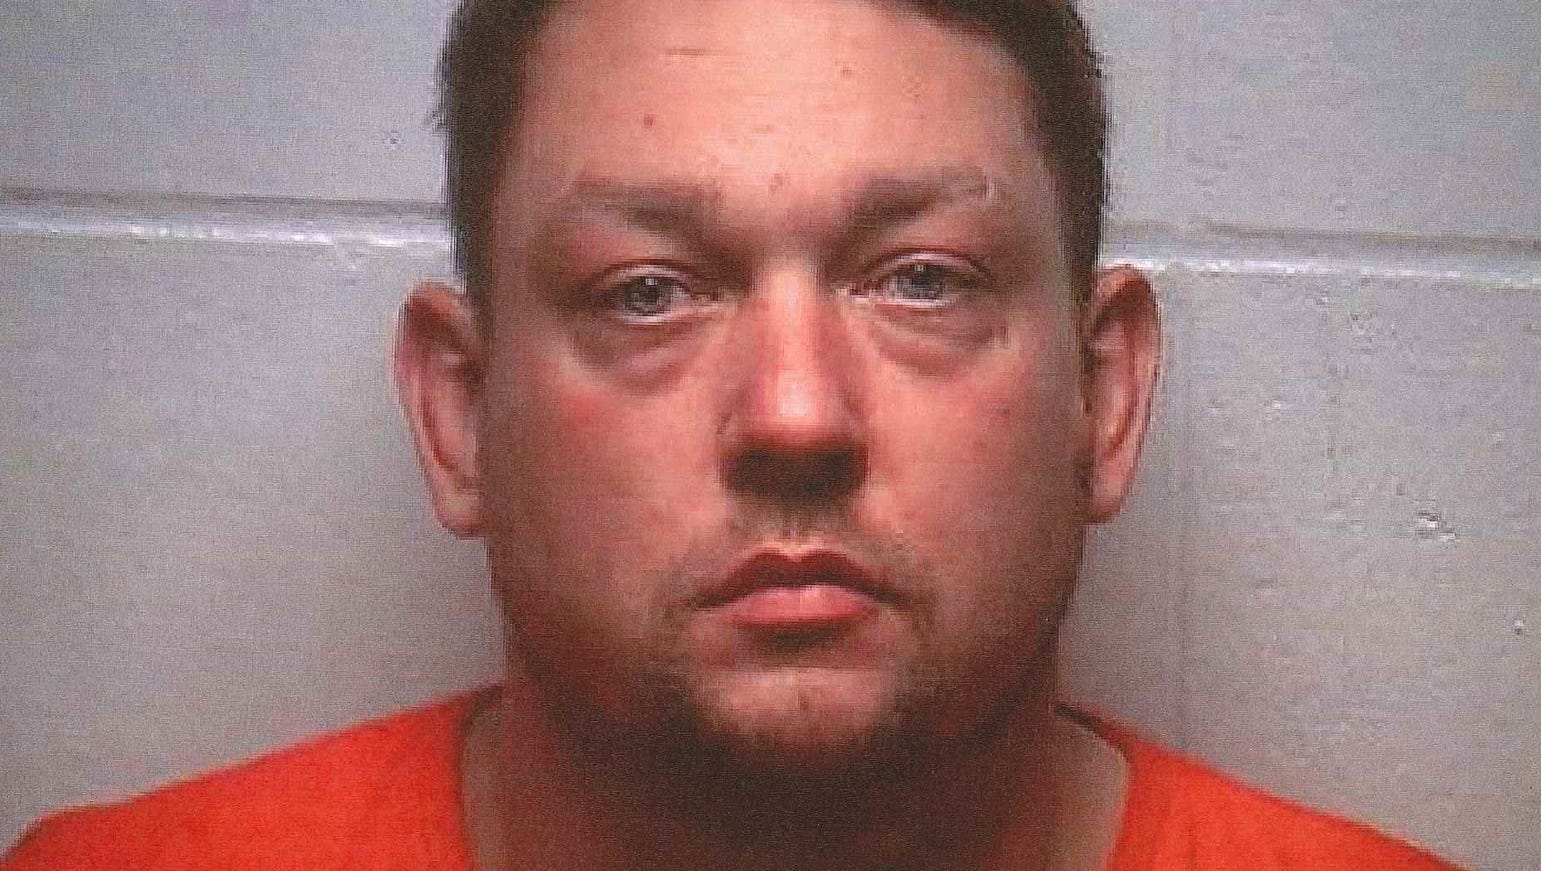 Wausau Man Pleads Not Guilty By Reason Of Mental Illness To Homicide